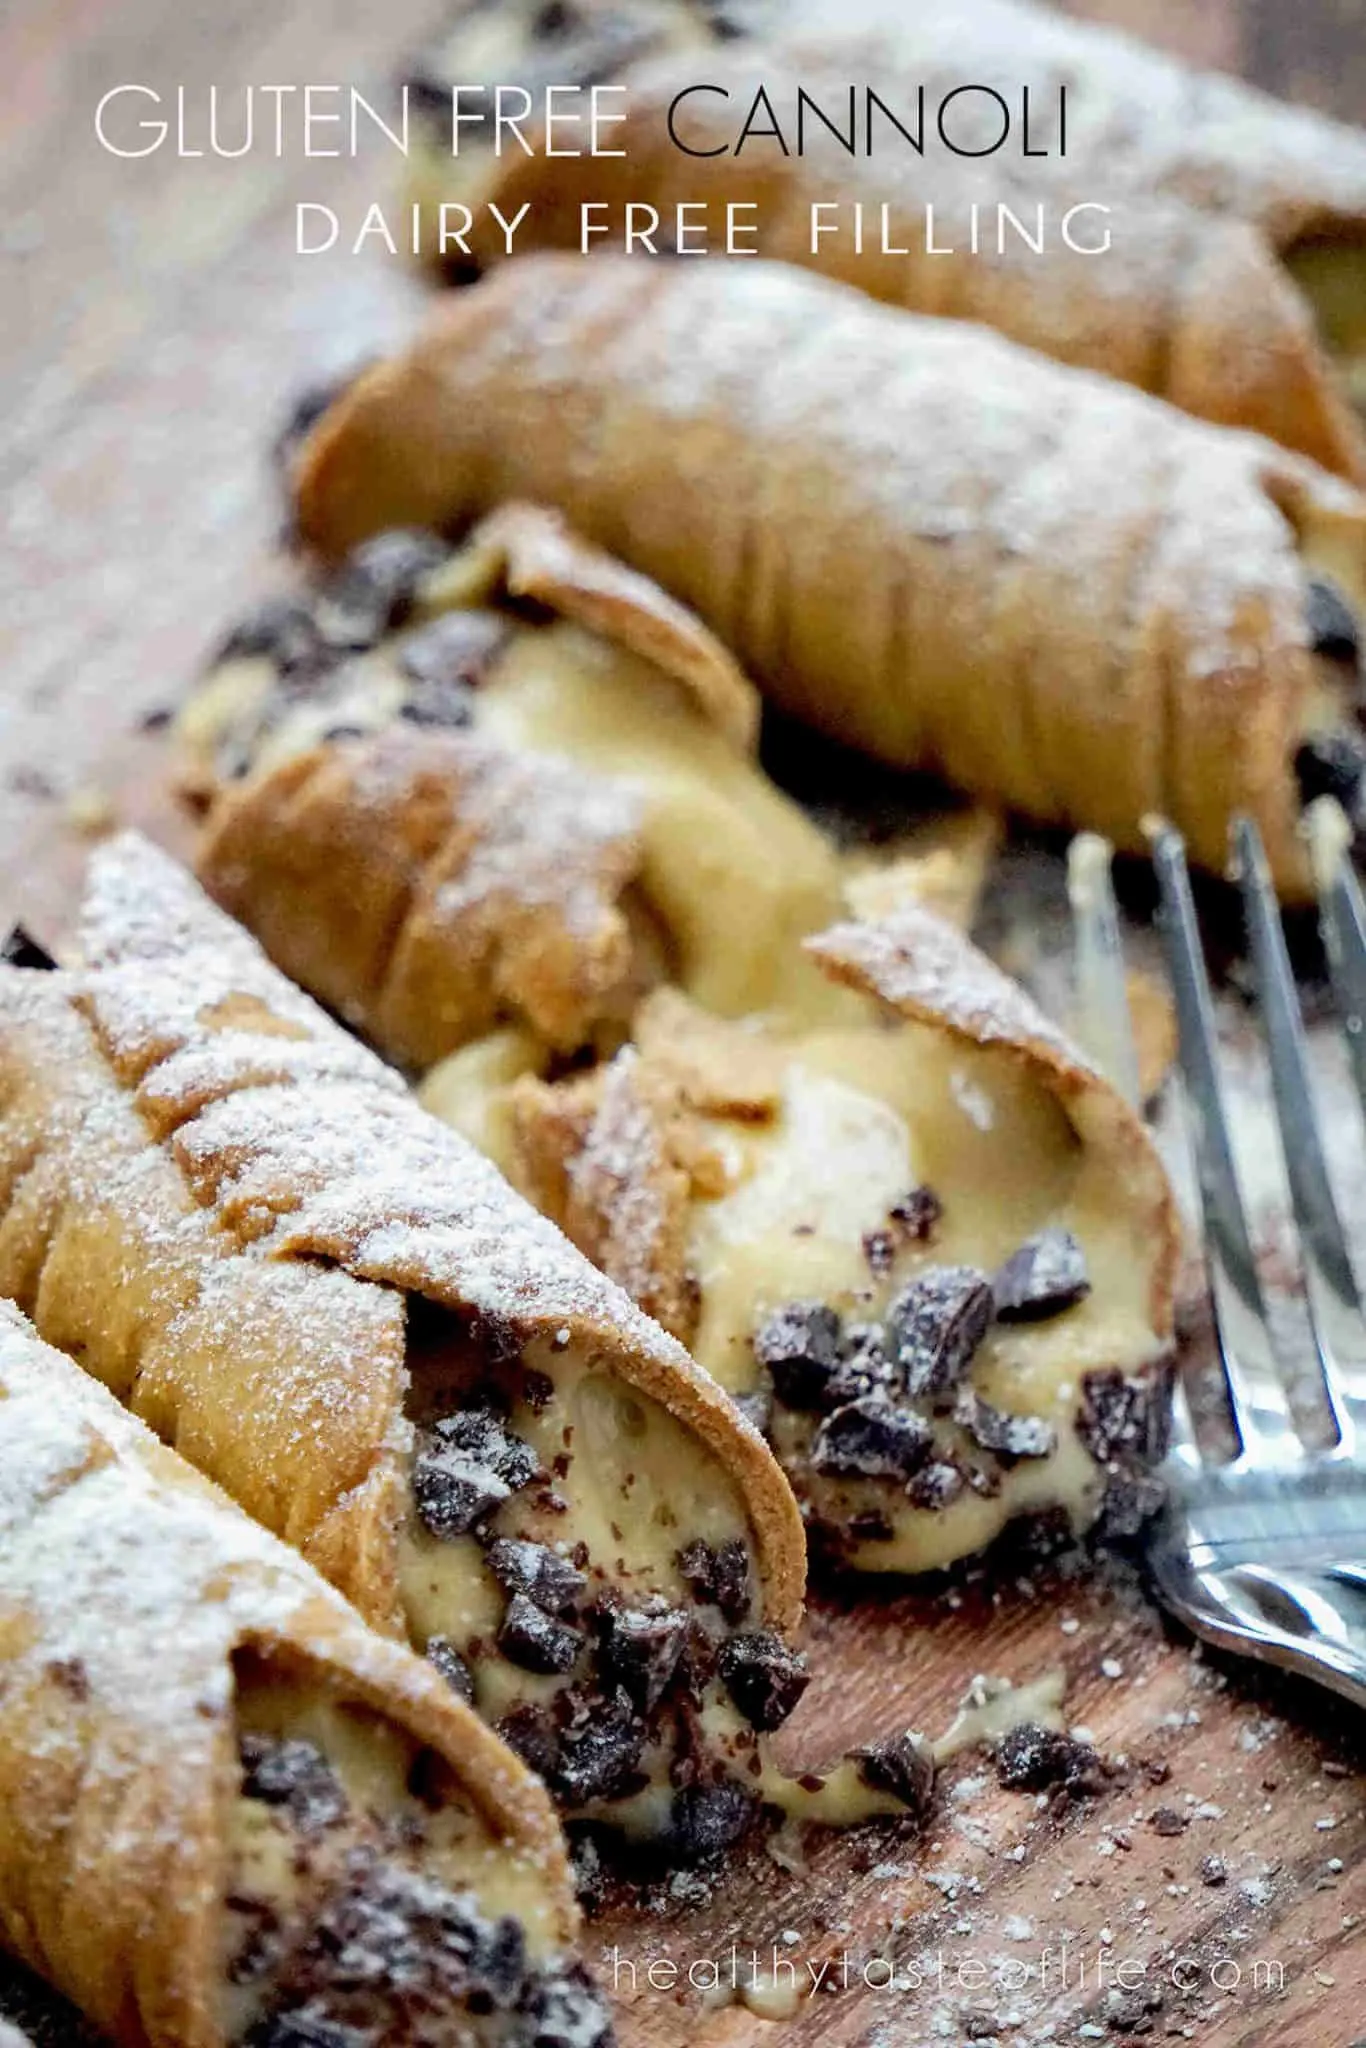 Gluten Free Cannoli Recipe - A Gluten free, dairy free and refined sugar free dessert perfect for Holiday parties including Christmas. Great for kids too!